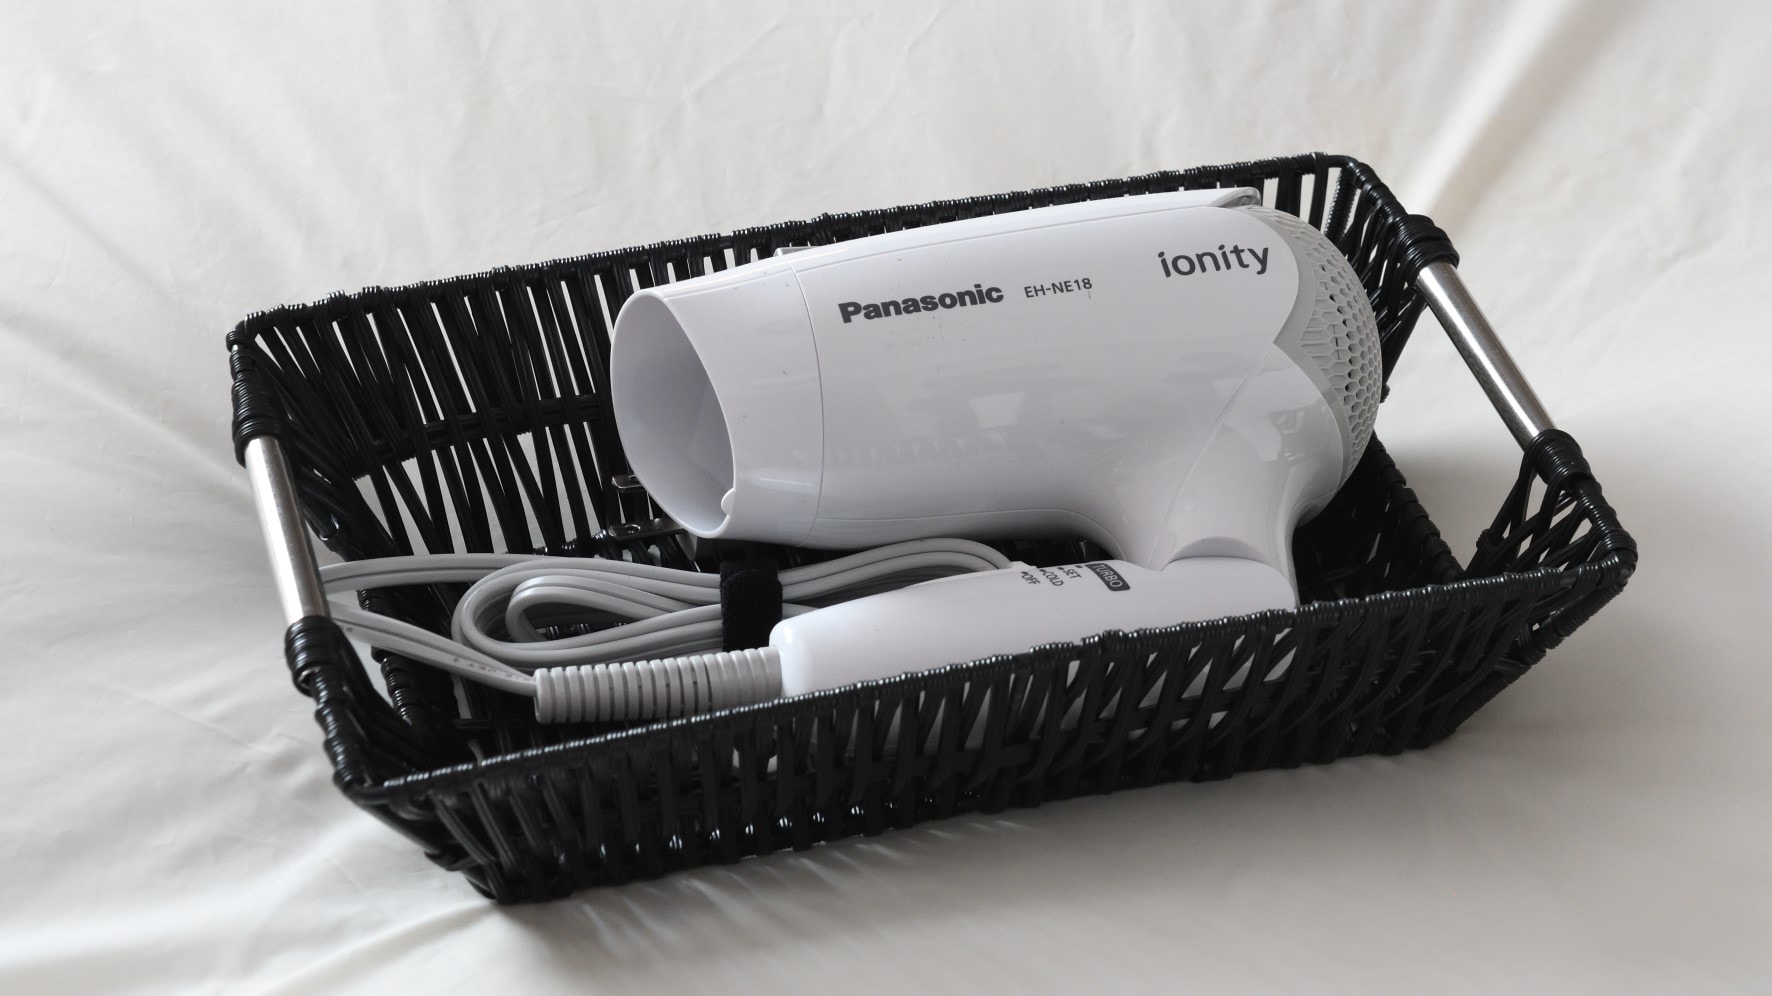 ◇ Room amenities Dryer with turbo mode